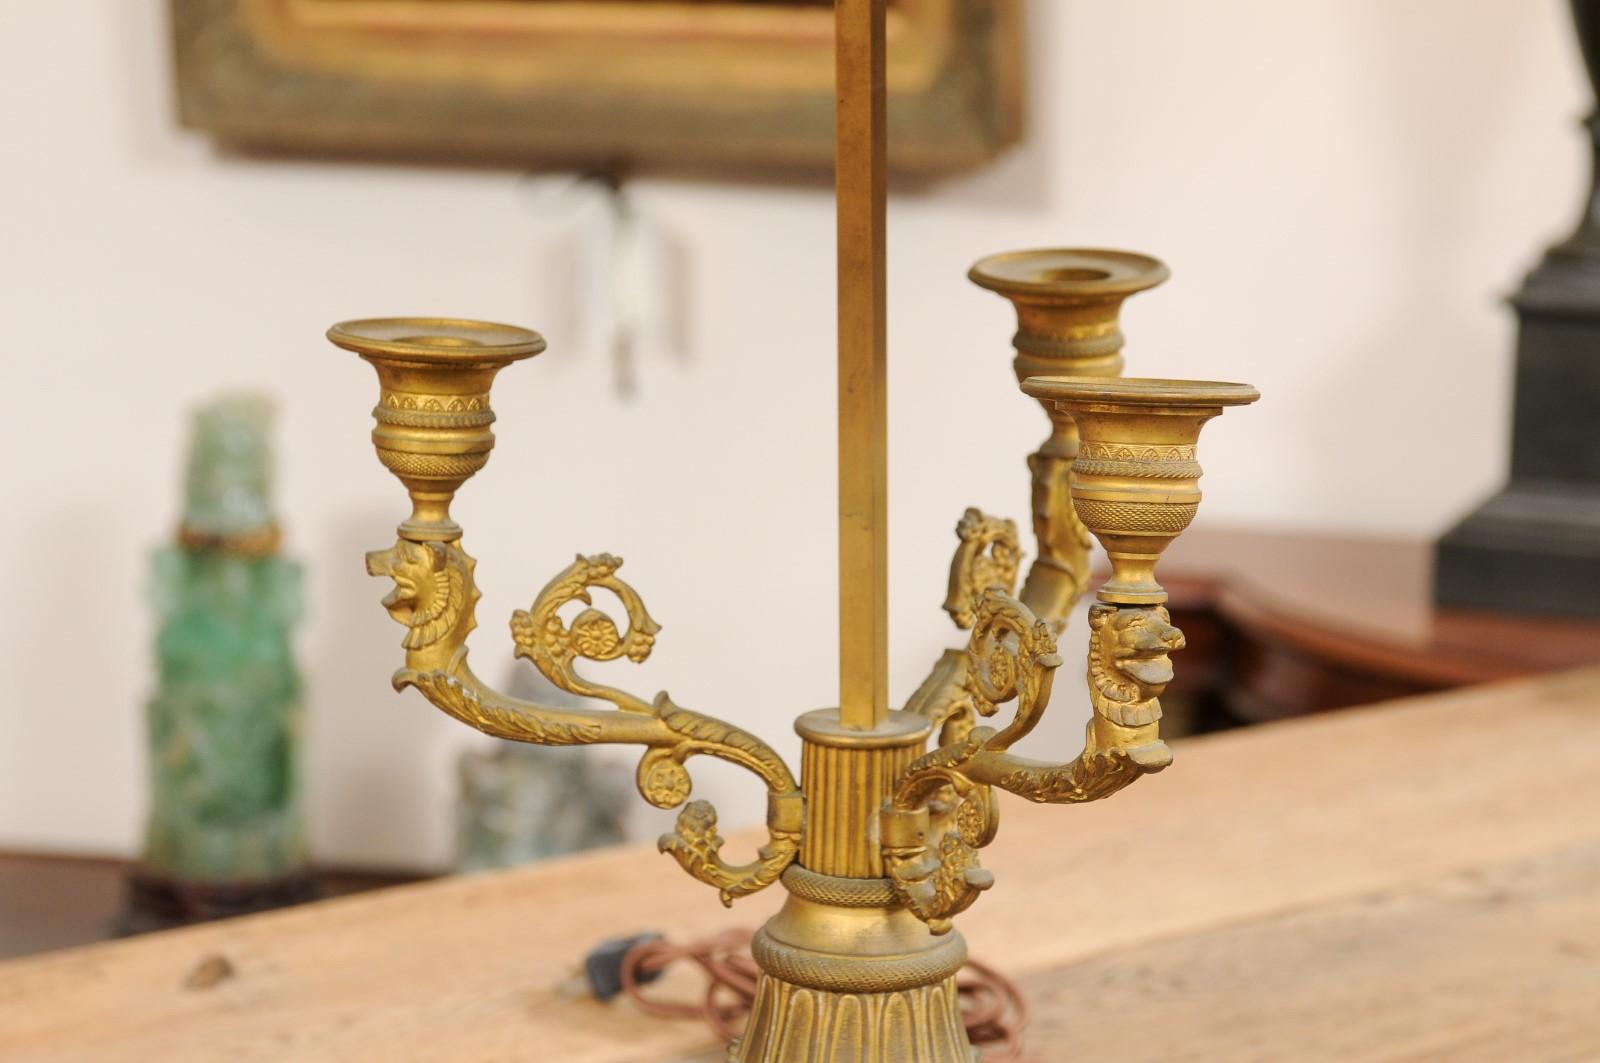 Large 19th Century French Bronze Bouillotte Lamp with Black Painted Tole Shade For Sale 9